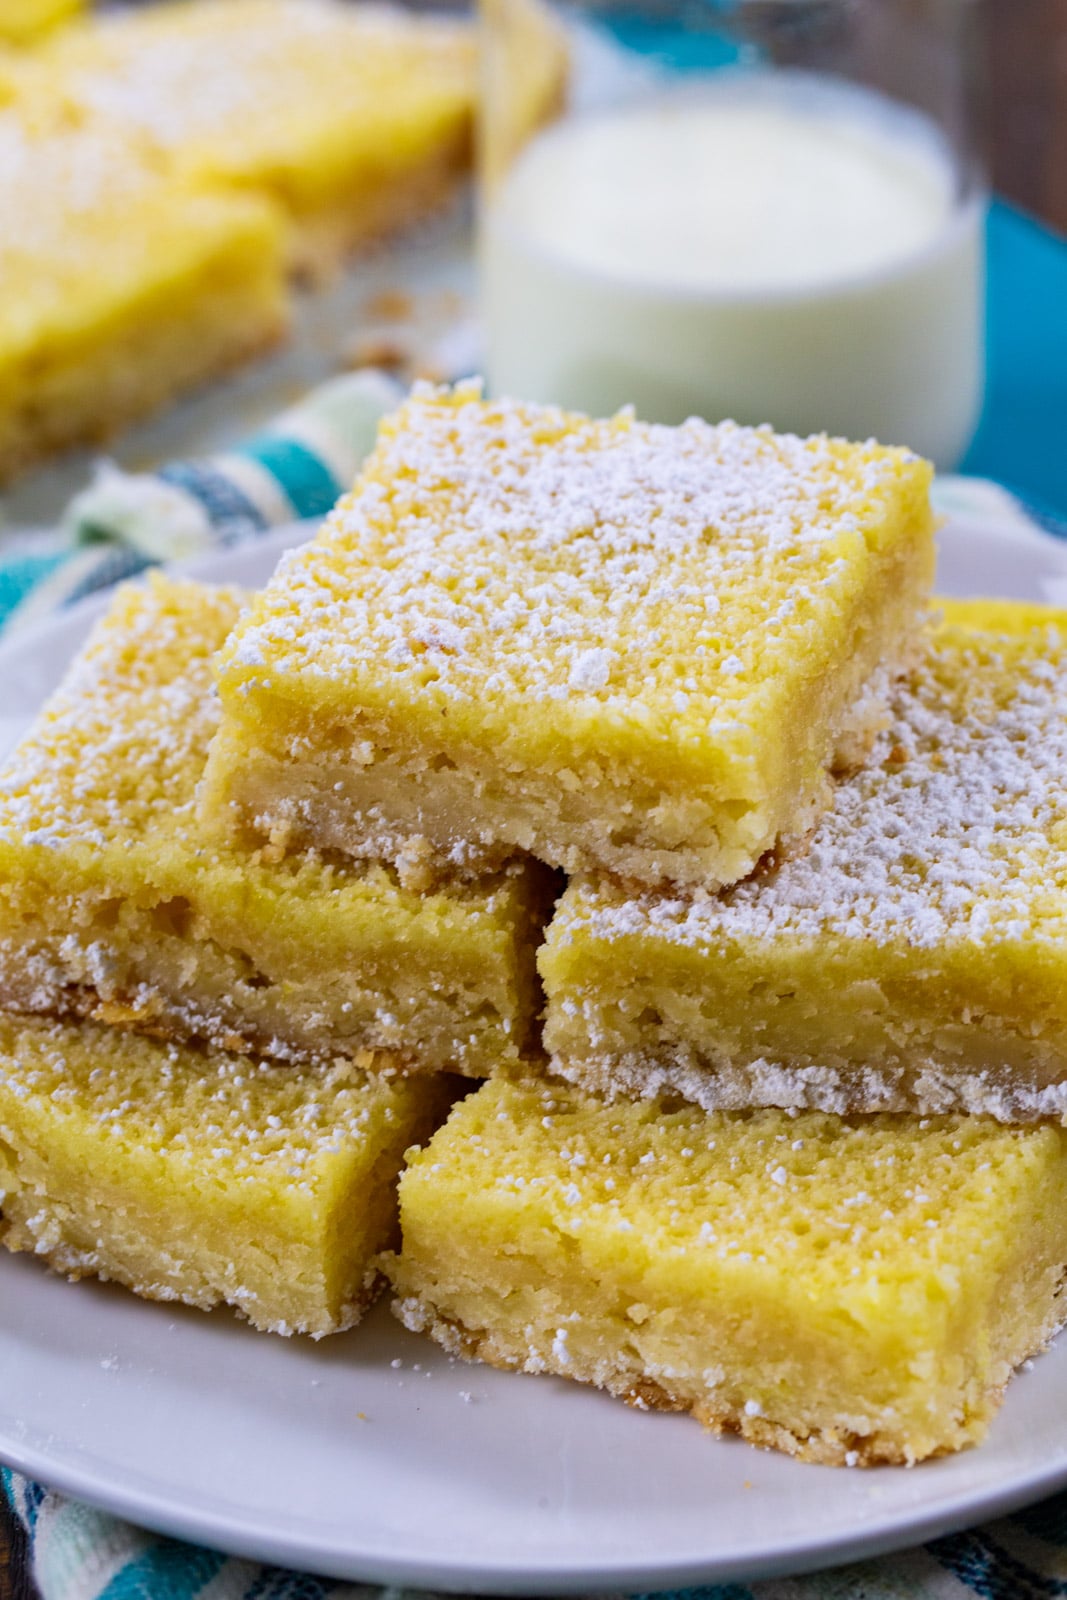 Buttermilk Chess Bars stacked on a plate and a jug of milk.